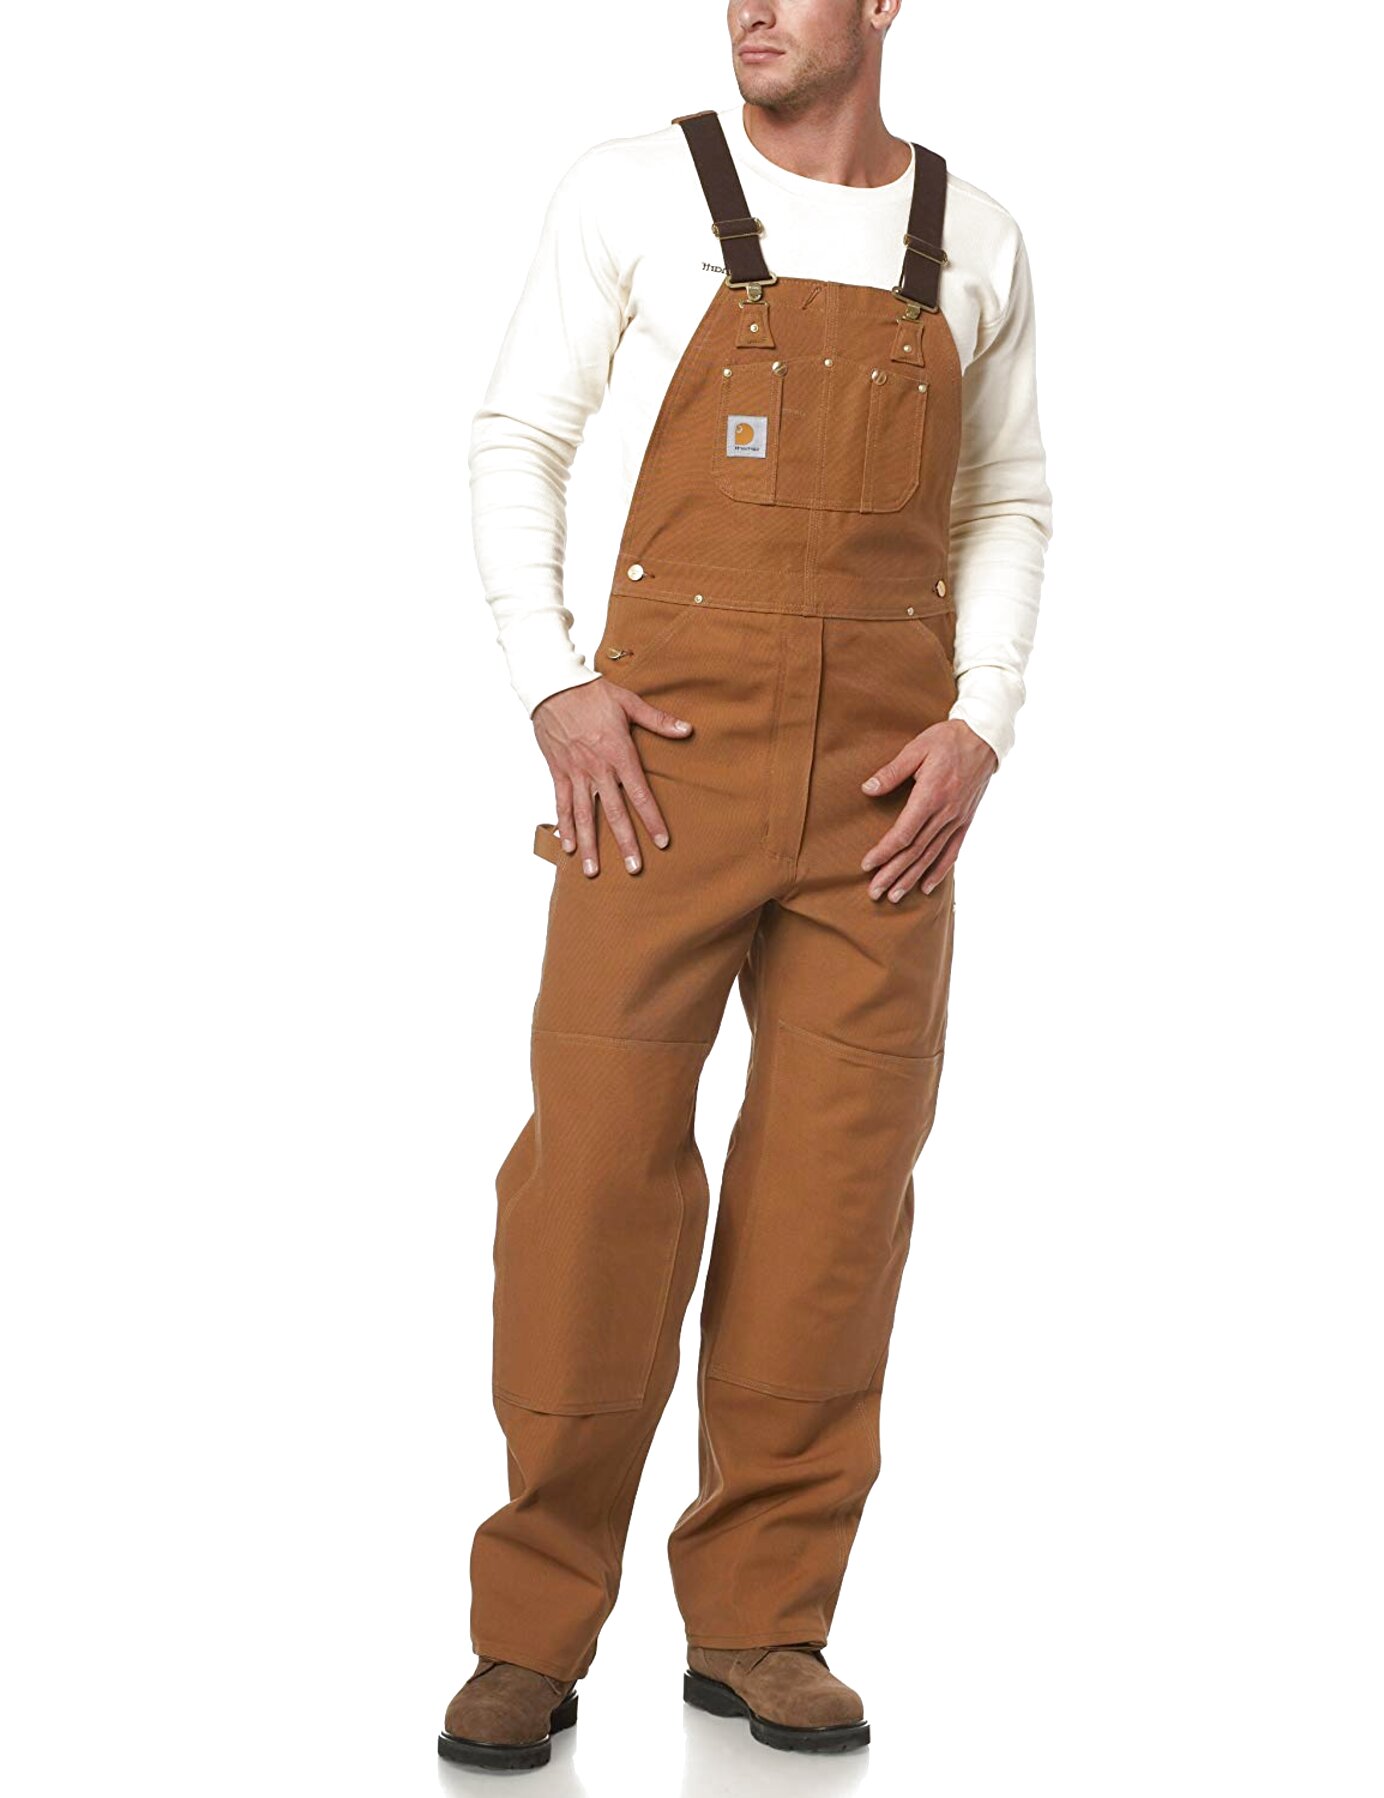 Carhartt Overalls for sale in UK | 55 used Carhartt Overalls